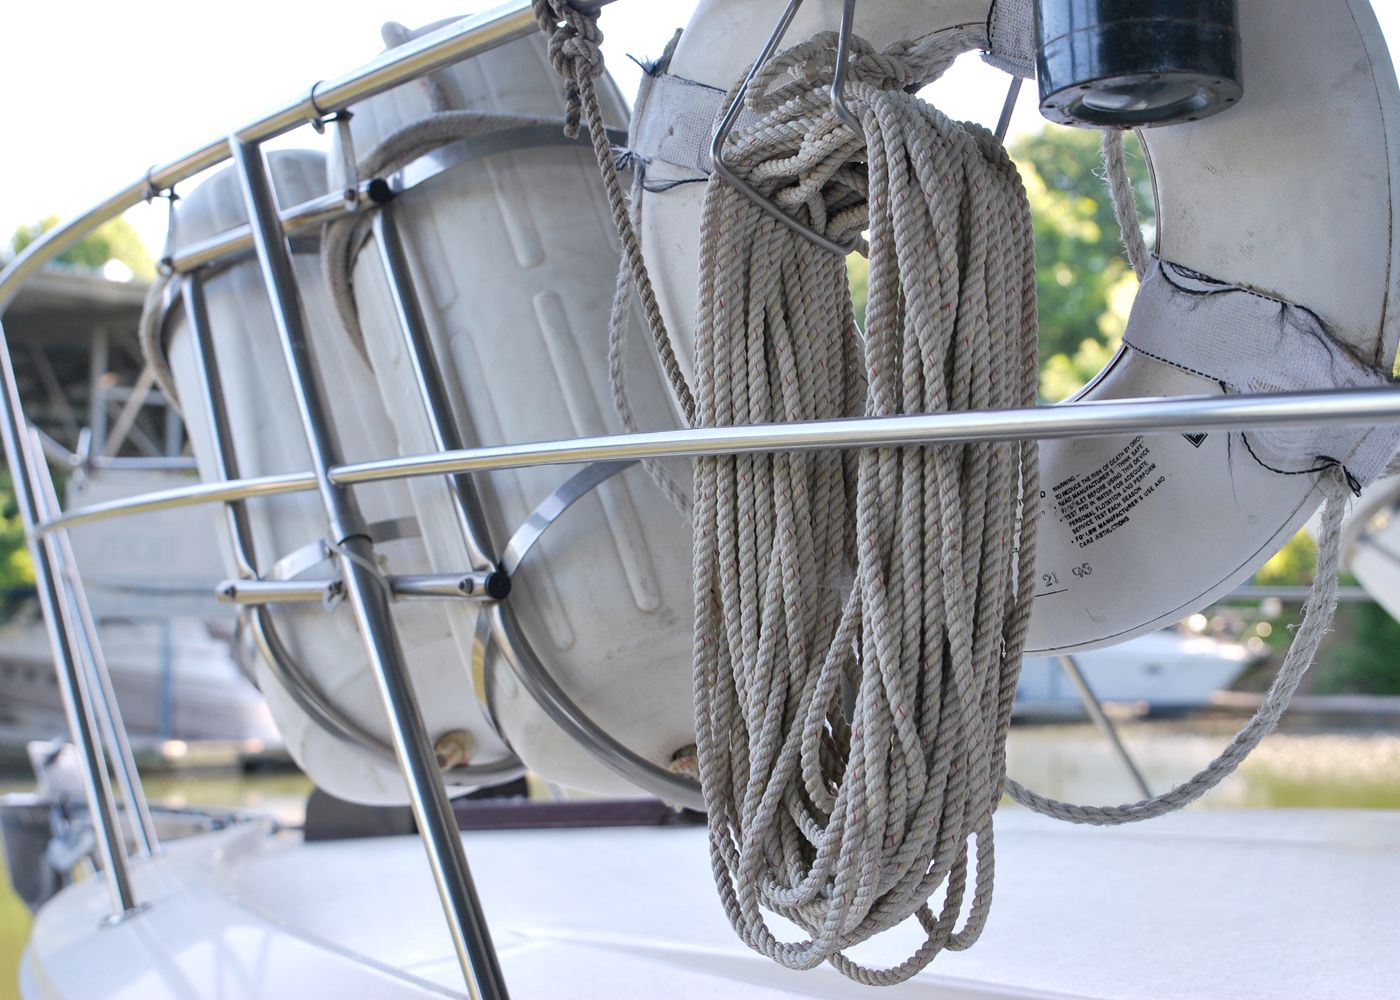 Image of a buoy and rope on the side of a white boat